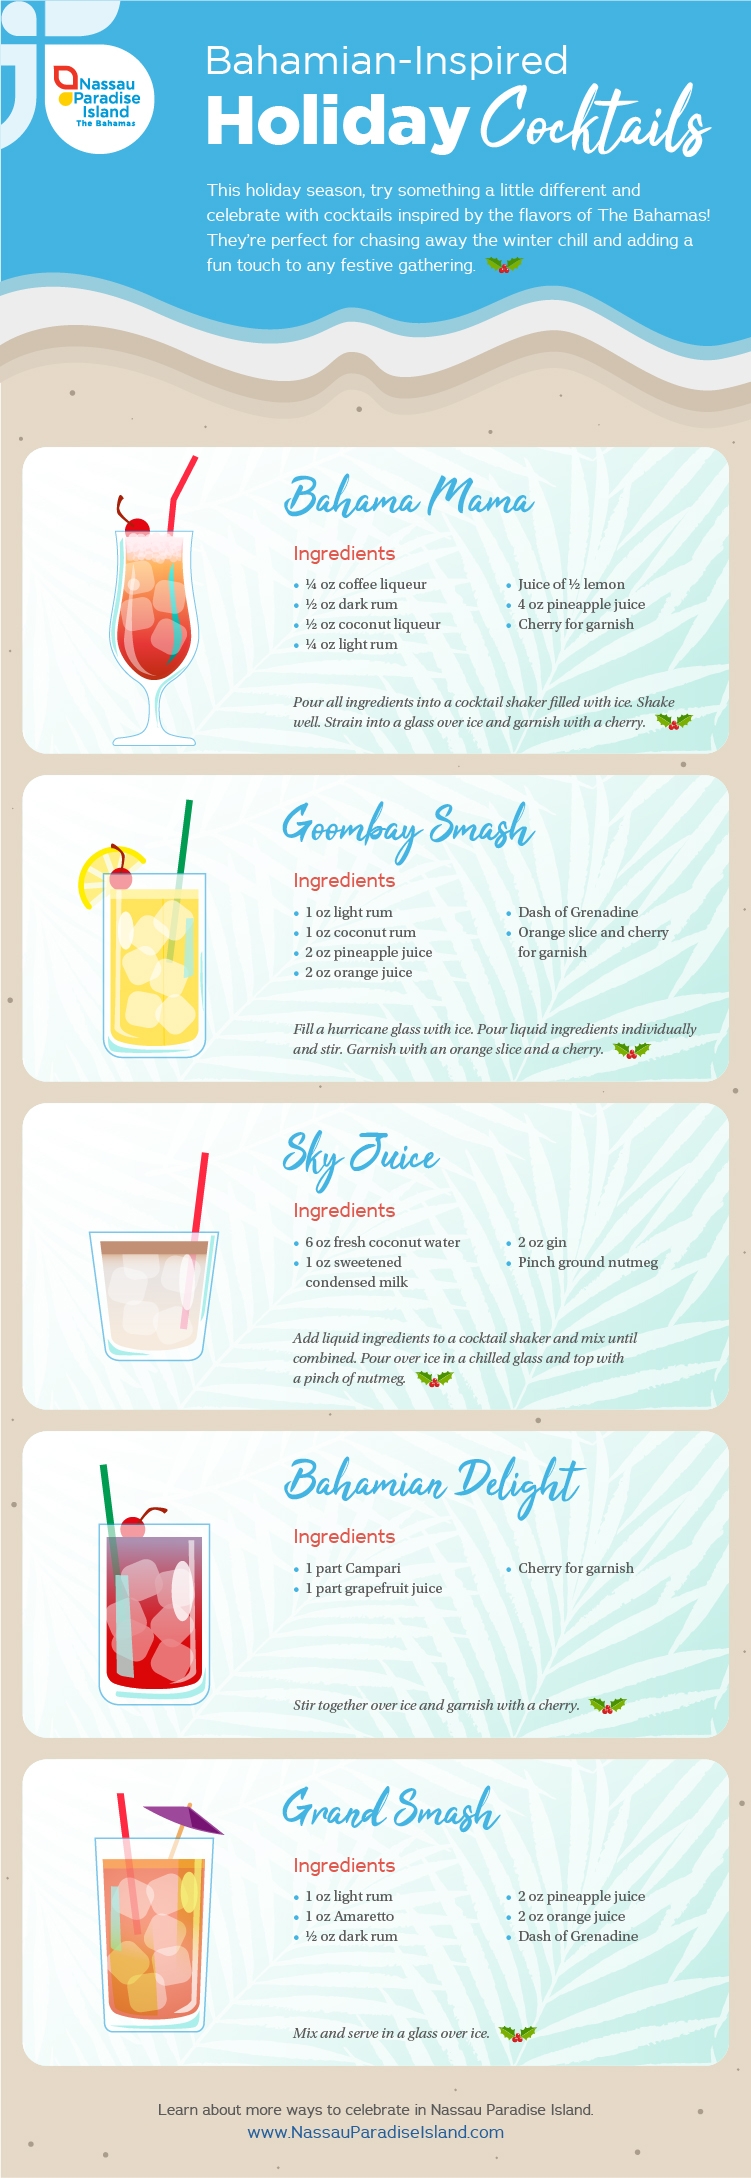 Infographic featuring Bahamian-style holiday cocktail recipes